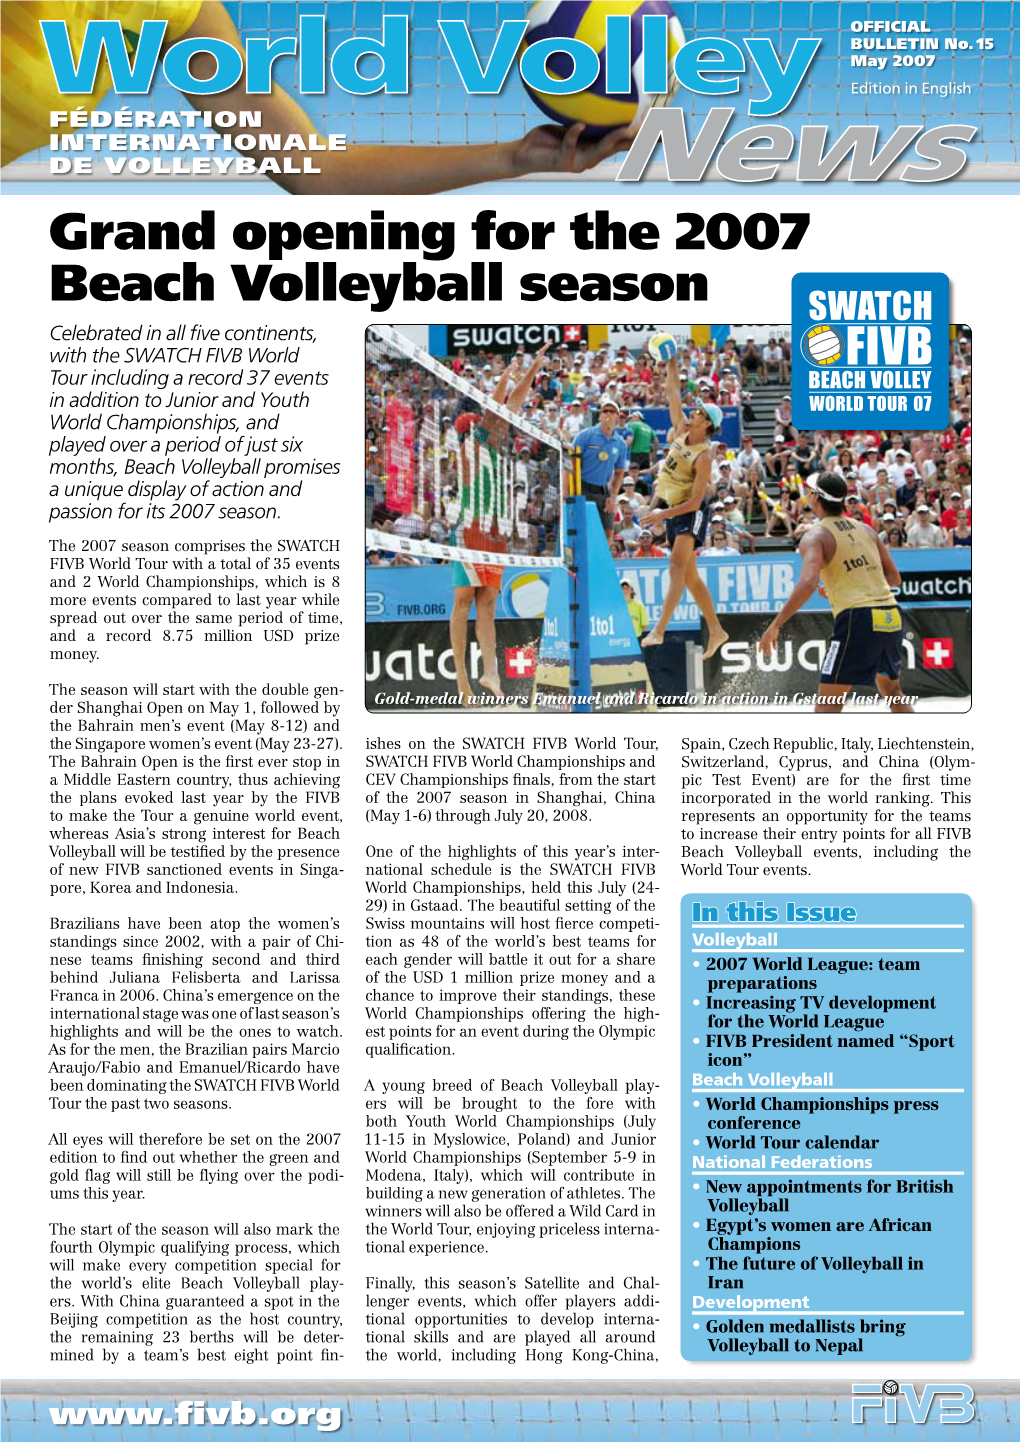 Grand Opening for the 2007 Beach Volleyball Season